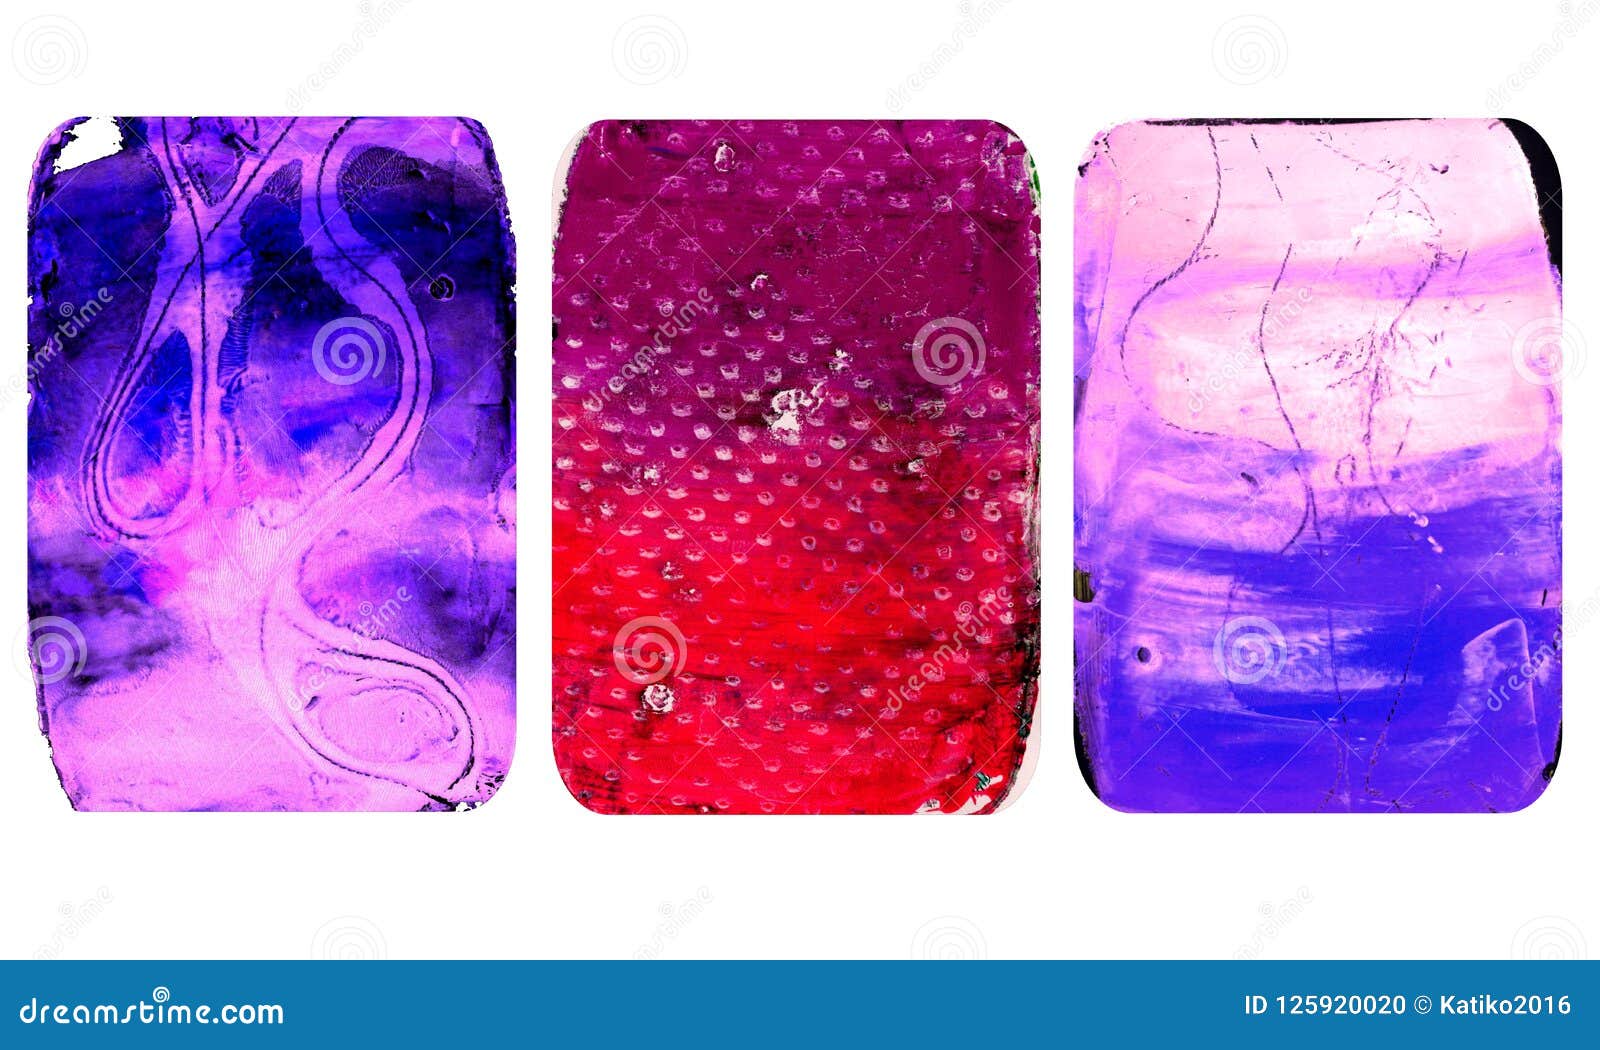 set of bright blurred abstract textures. colorful handmade backgrounds with imprints, stains, scuffed areas.